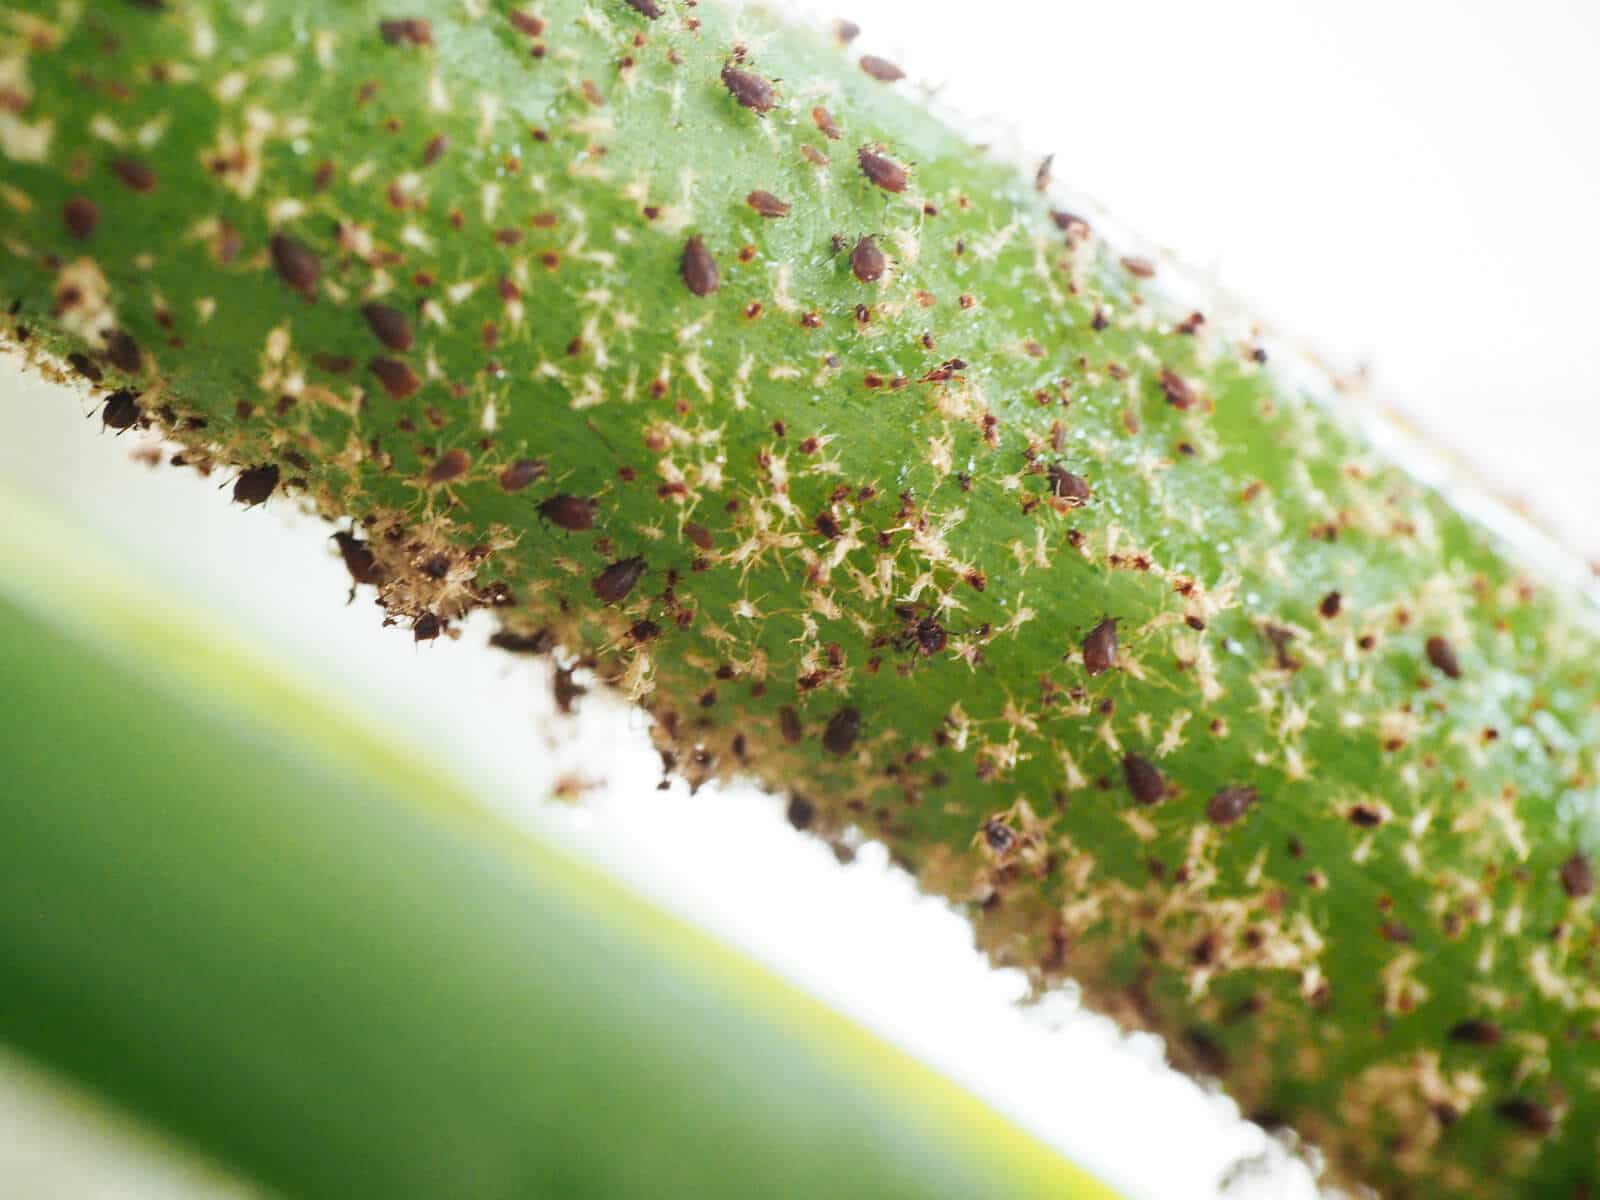 Aphid colonies reproduce rapidly